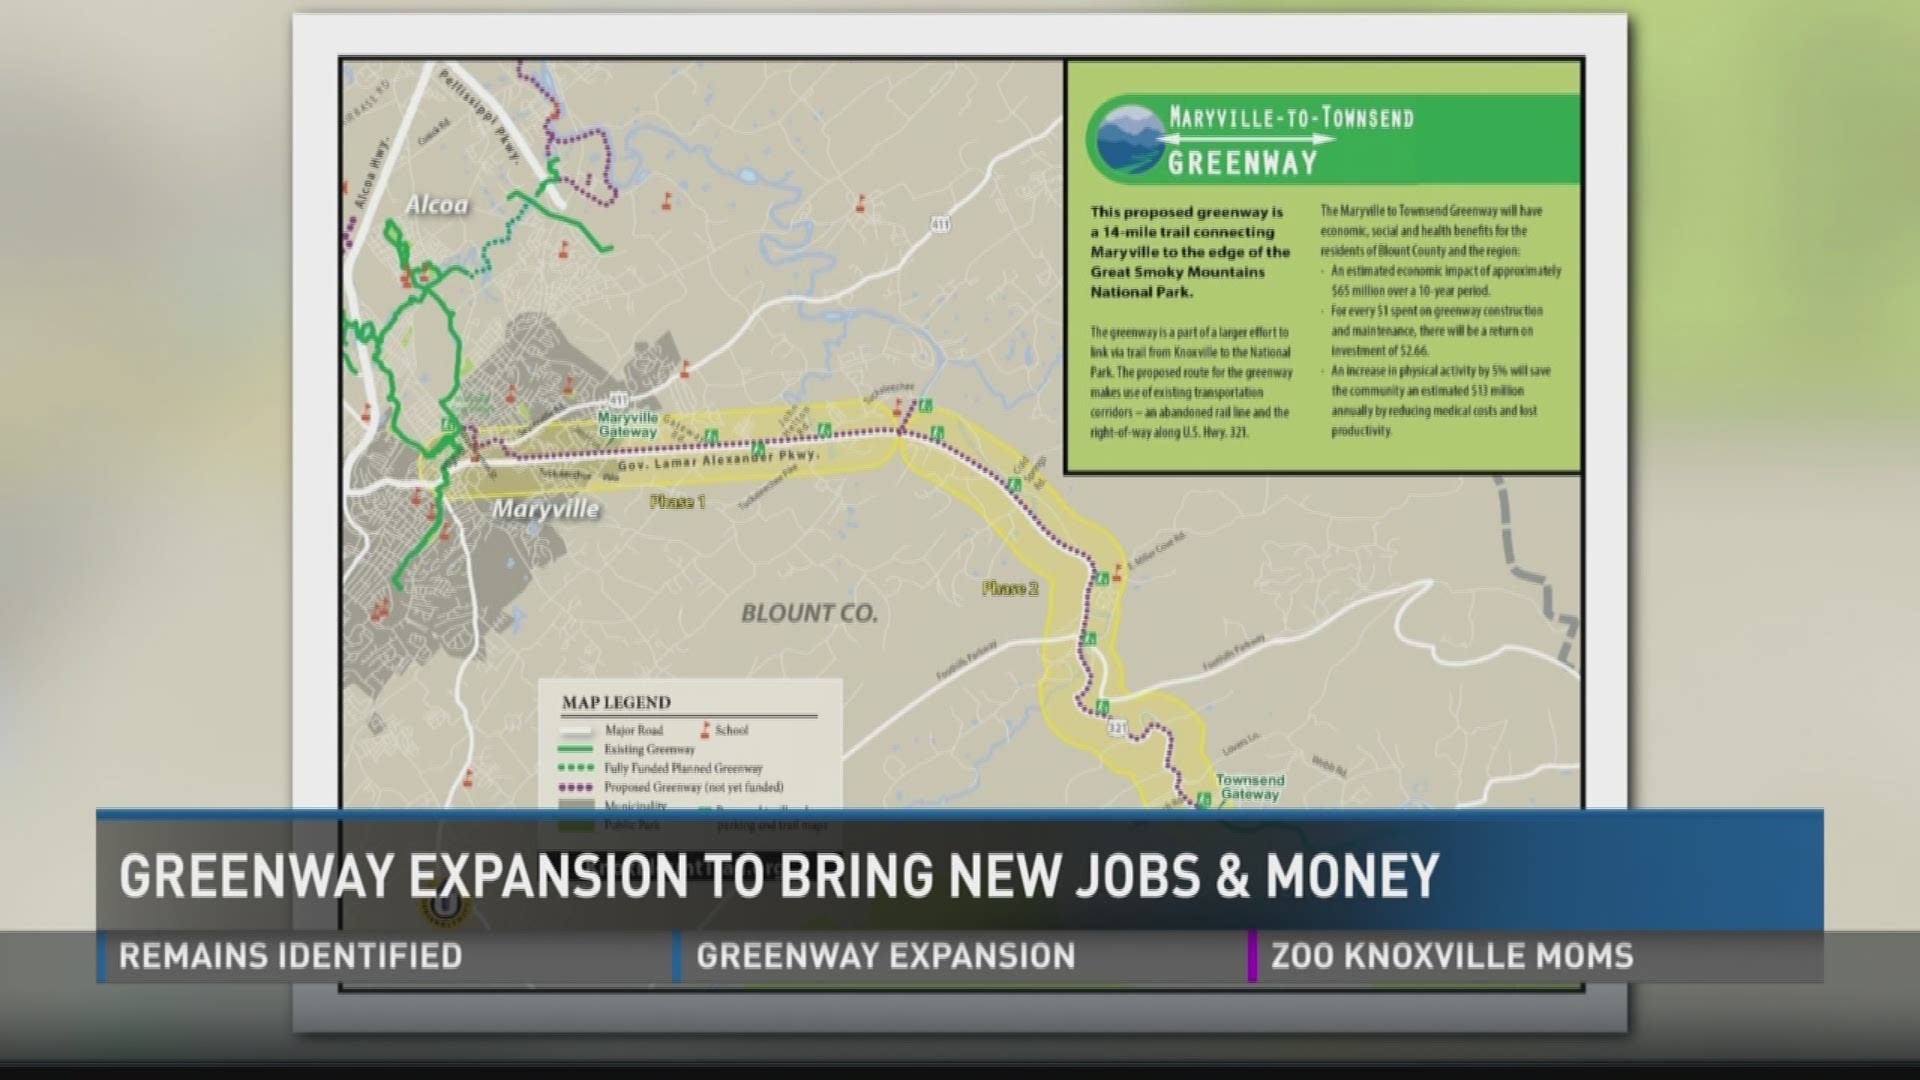 Carol Evans with Legacy Parks talks with John Becker about how a new greenway will bring jobs and money